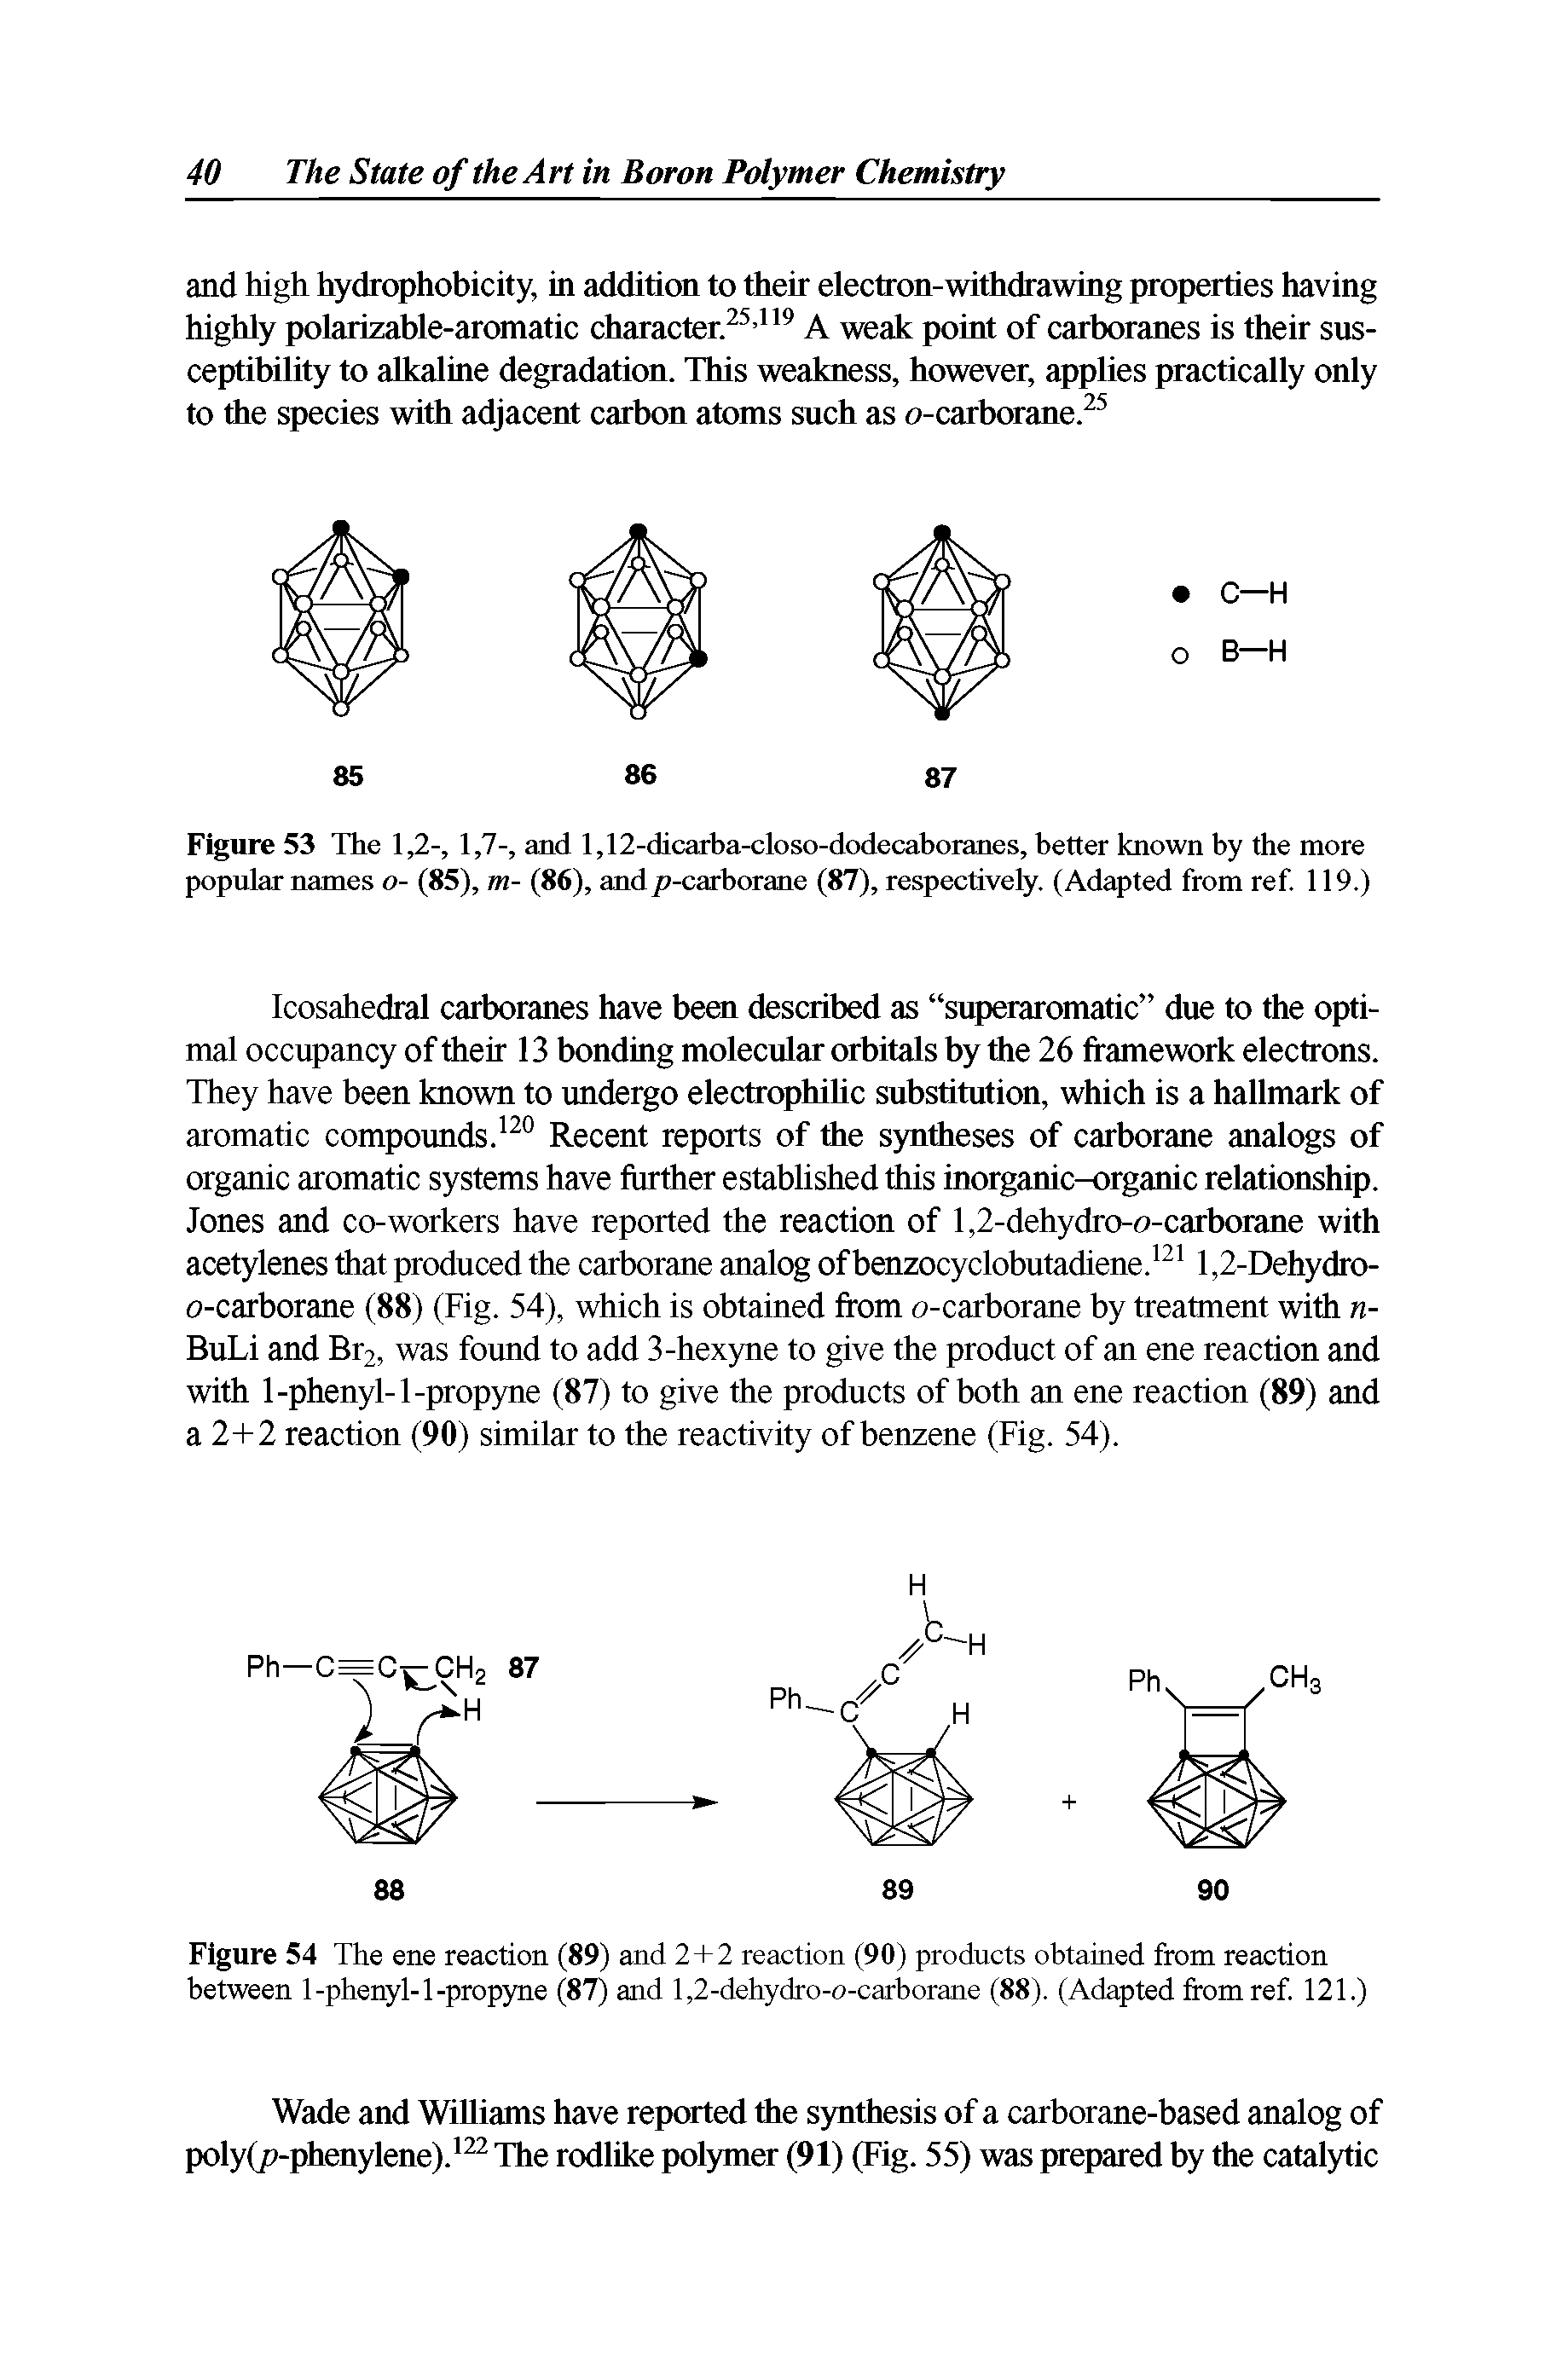 Figure 53 The 1,2-, 1,7-, and 1,12-dicarba-closo-dodecaboranes, better known by the more popular names o- (85), m- (86), and / -carborane (87), respectively. (Adapted from ref. 119.)...